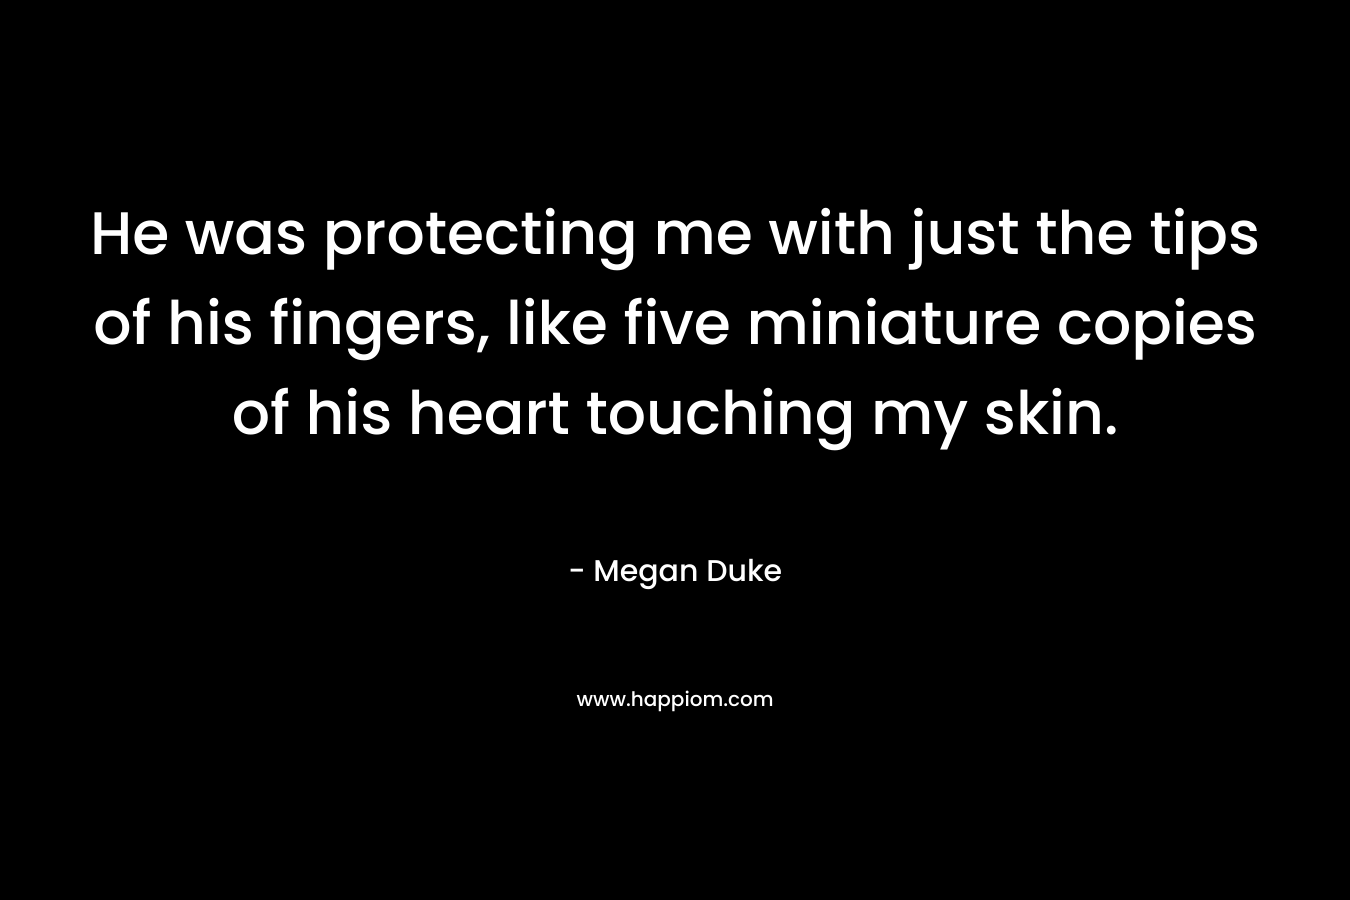 He was protecting me with just the tips of his fingers, like five miniature copies of his heart touching my skin.